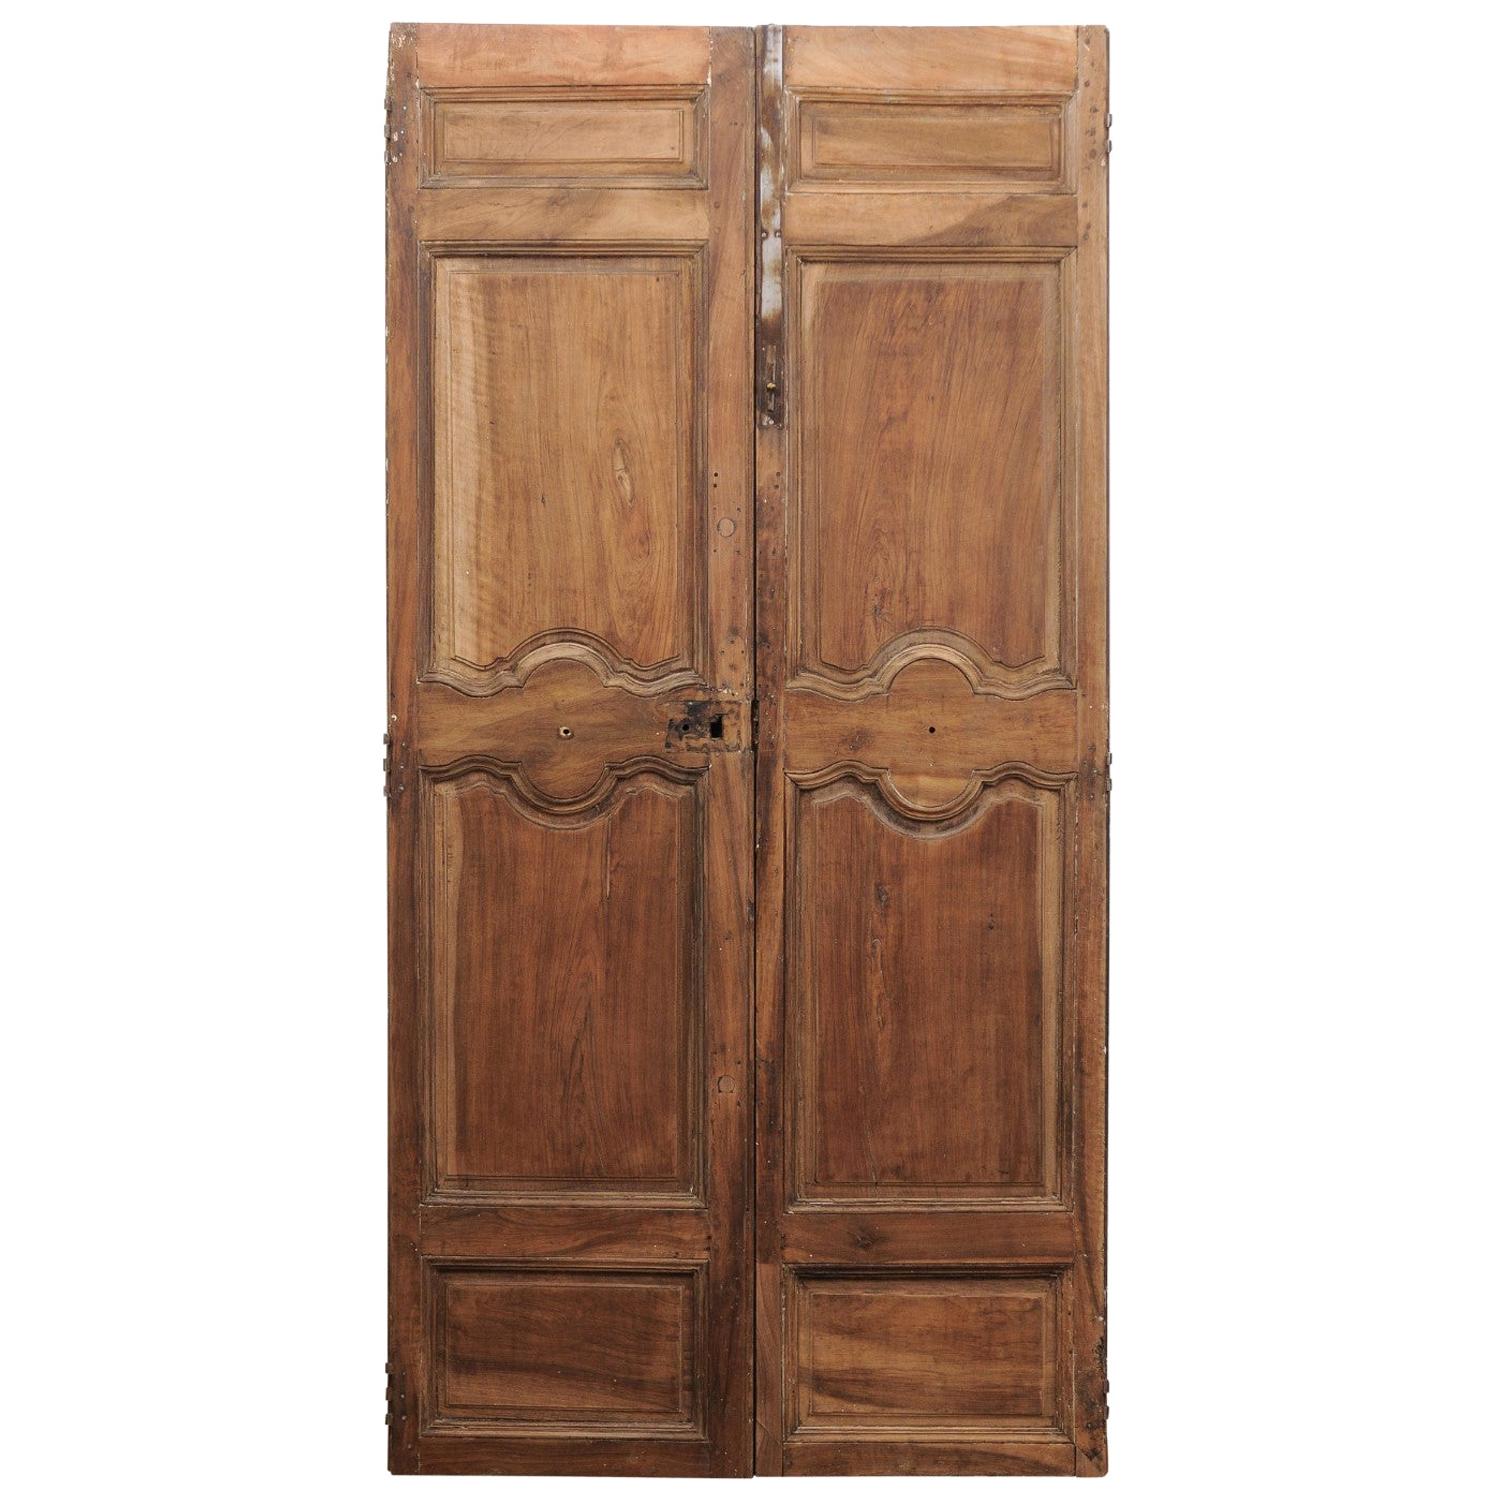 French 18th Century Tall Carved Walnut Double Doors with Molded Panels